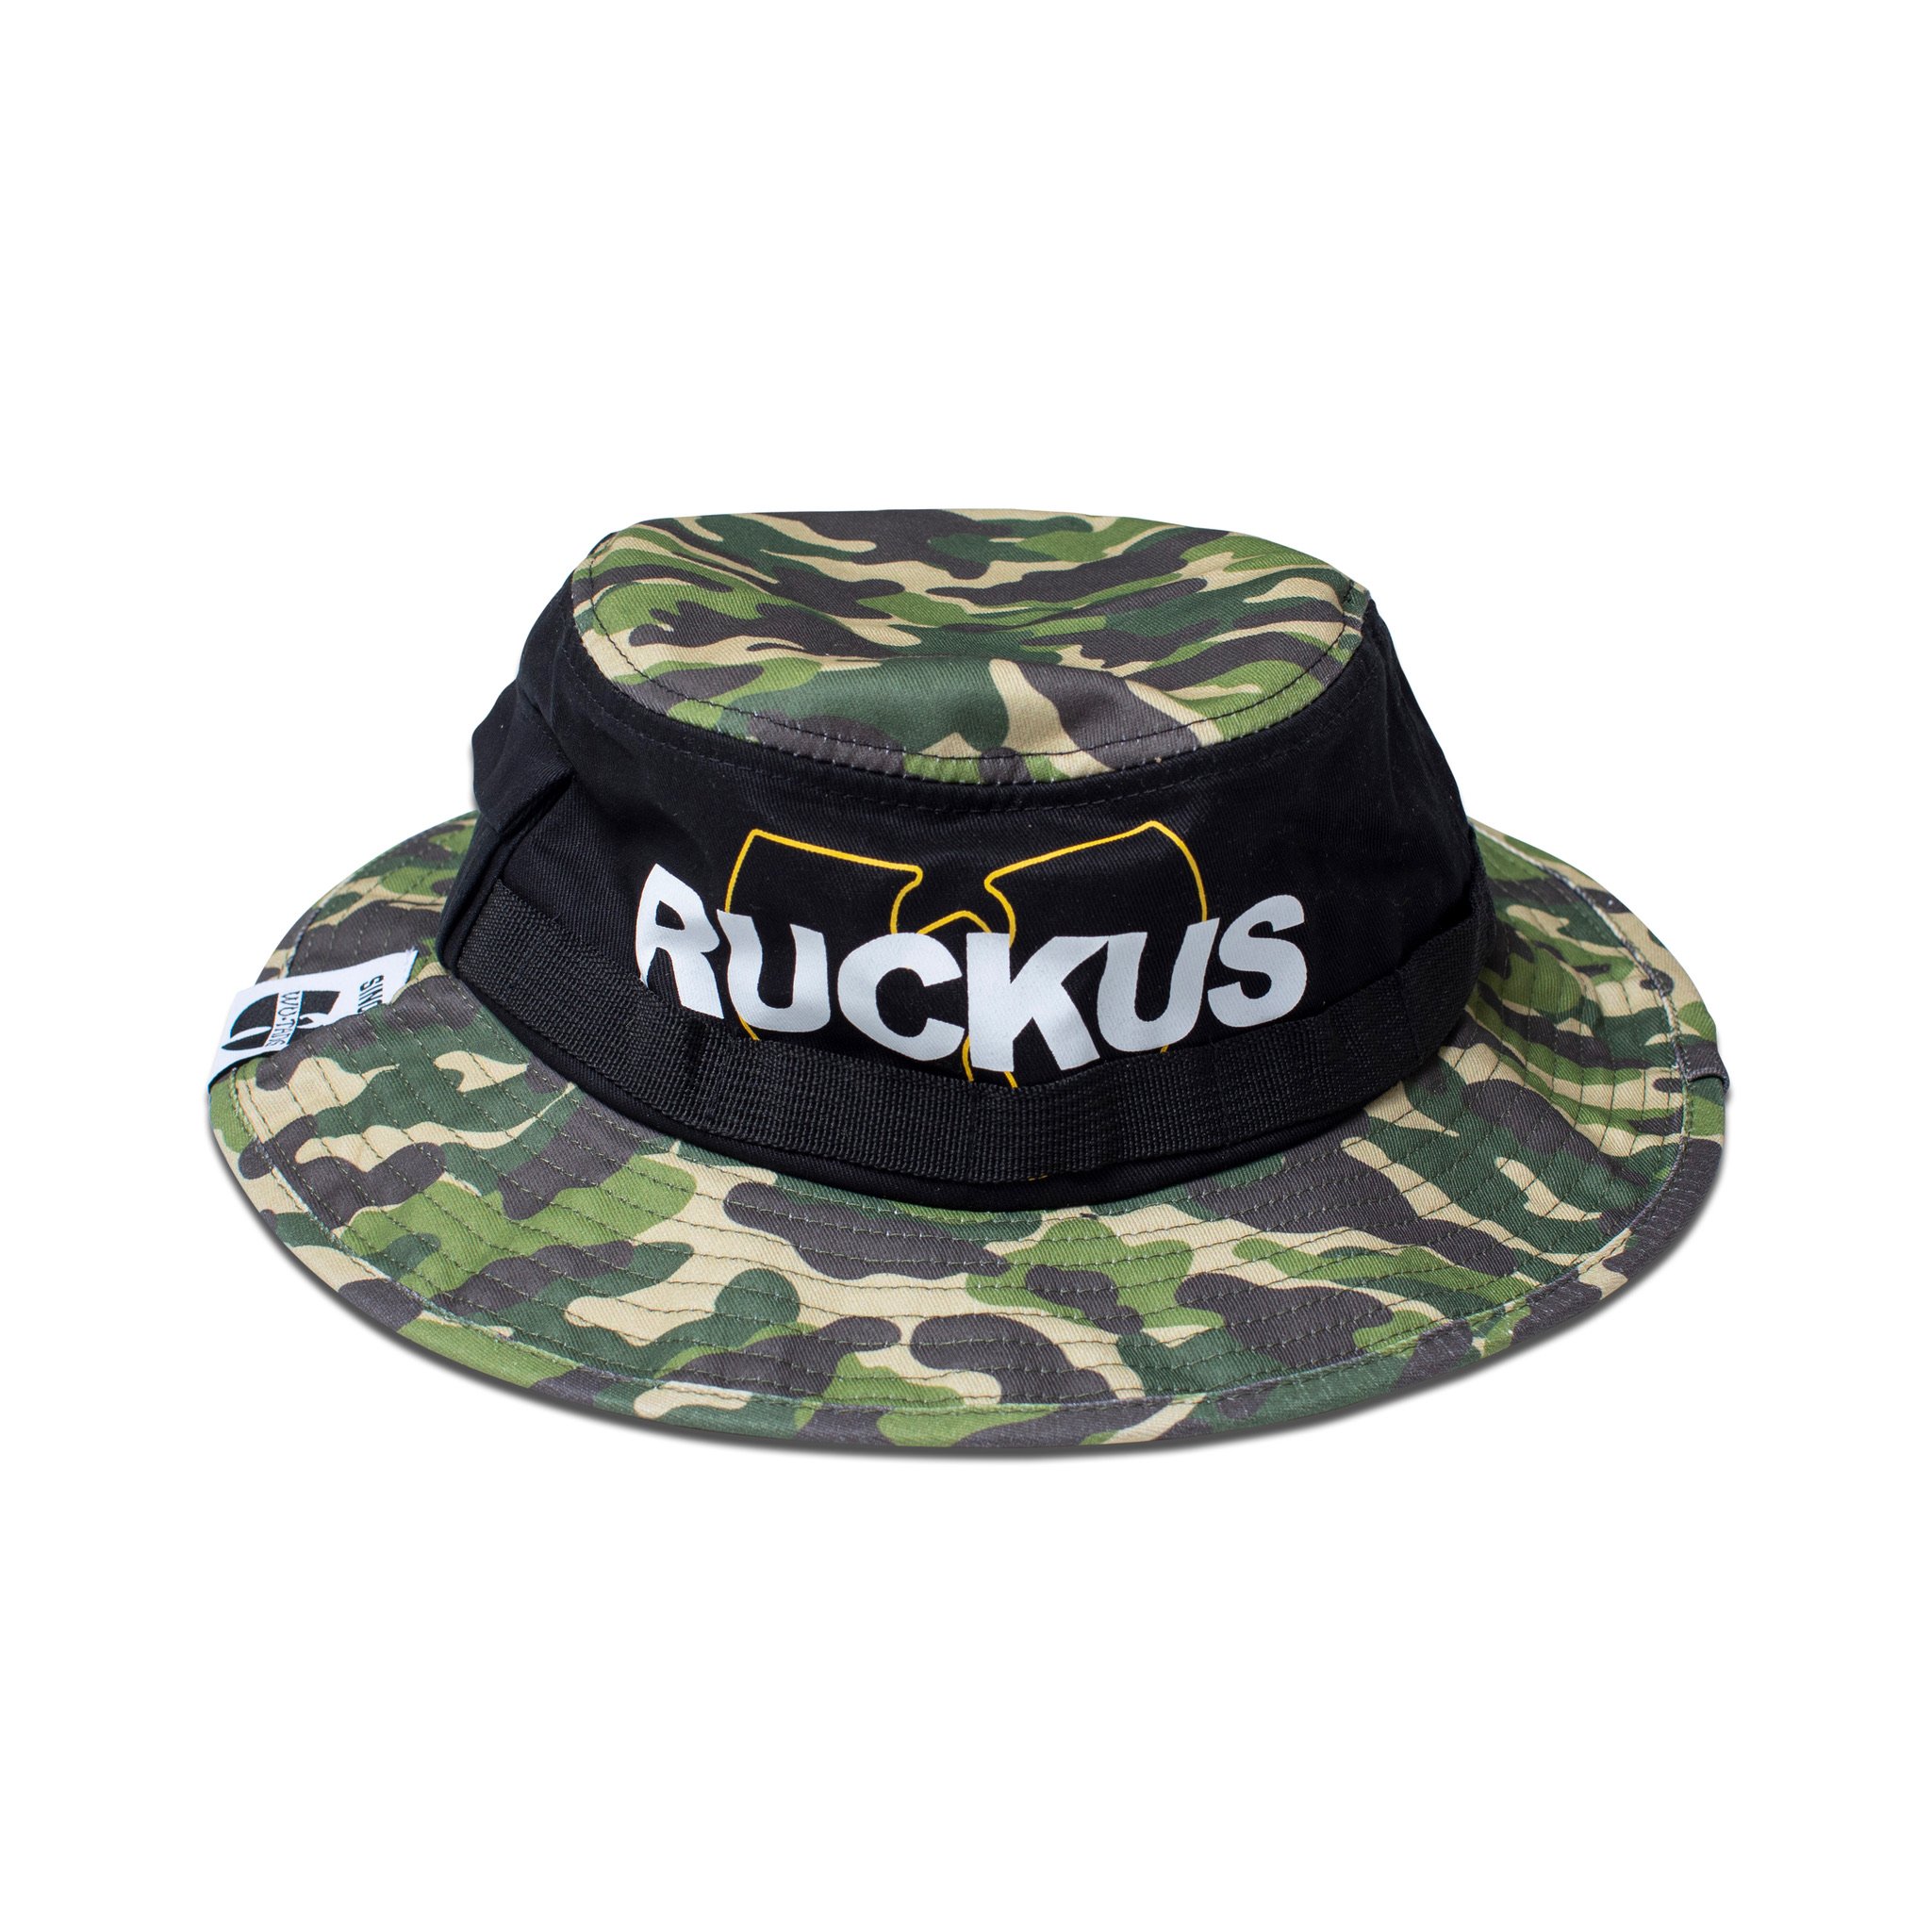 Boonie Hat | Sublimated Design | Screen Printed Logo | Woven Patch | Stash Pocket | Wu-Tang Clan